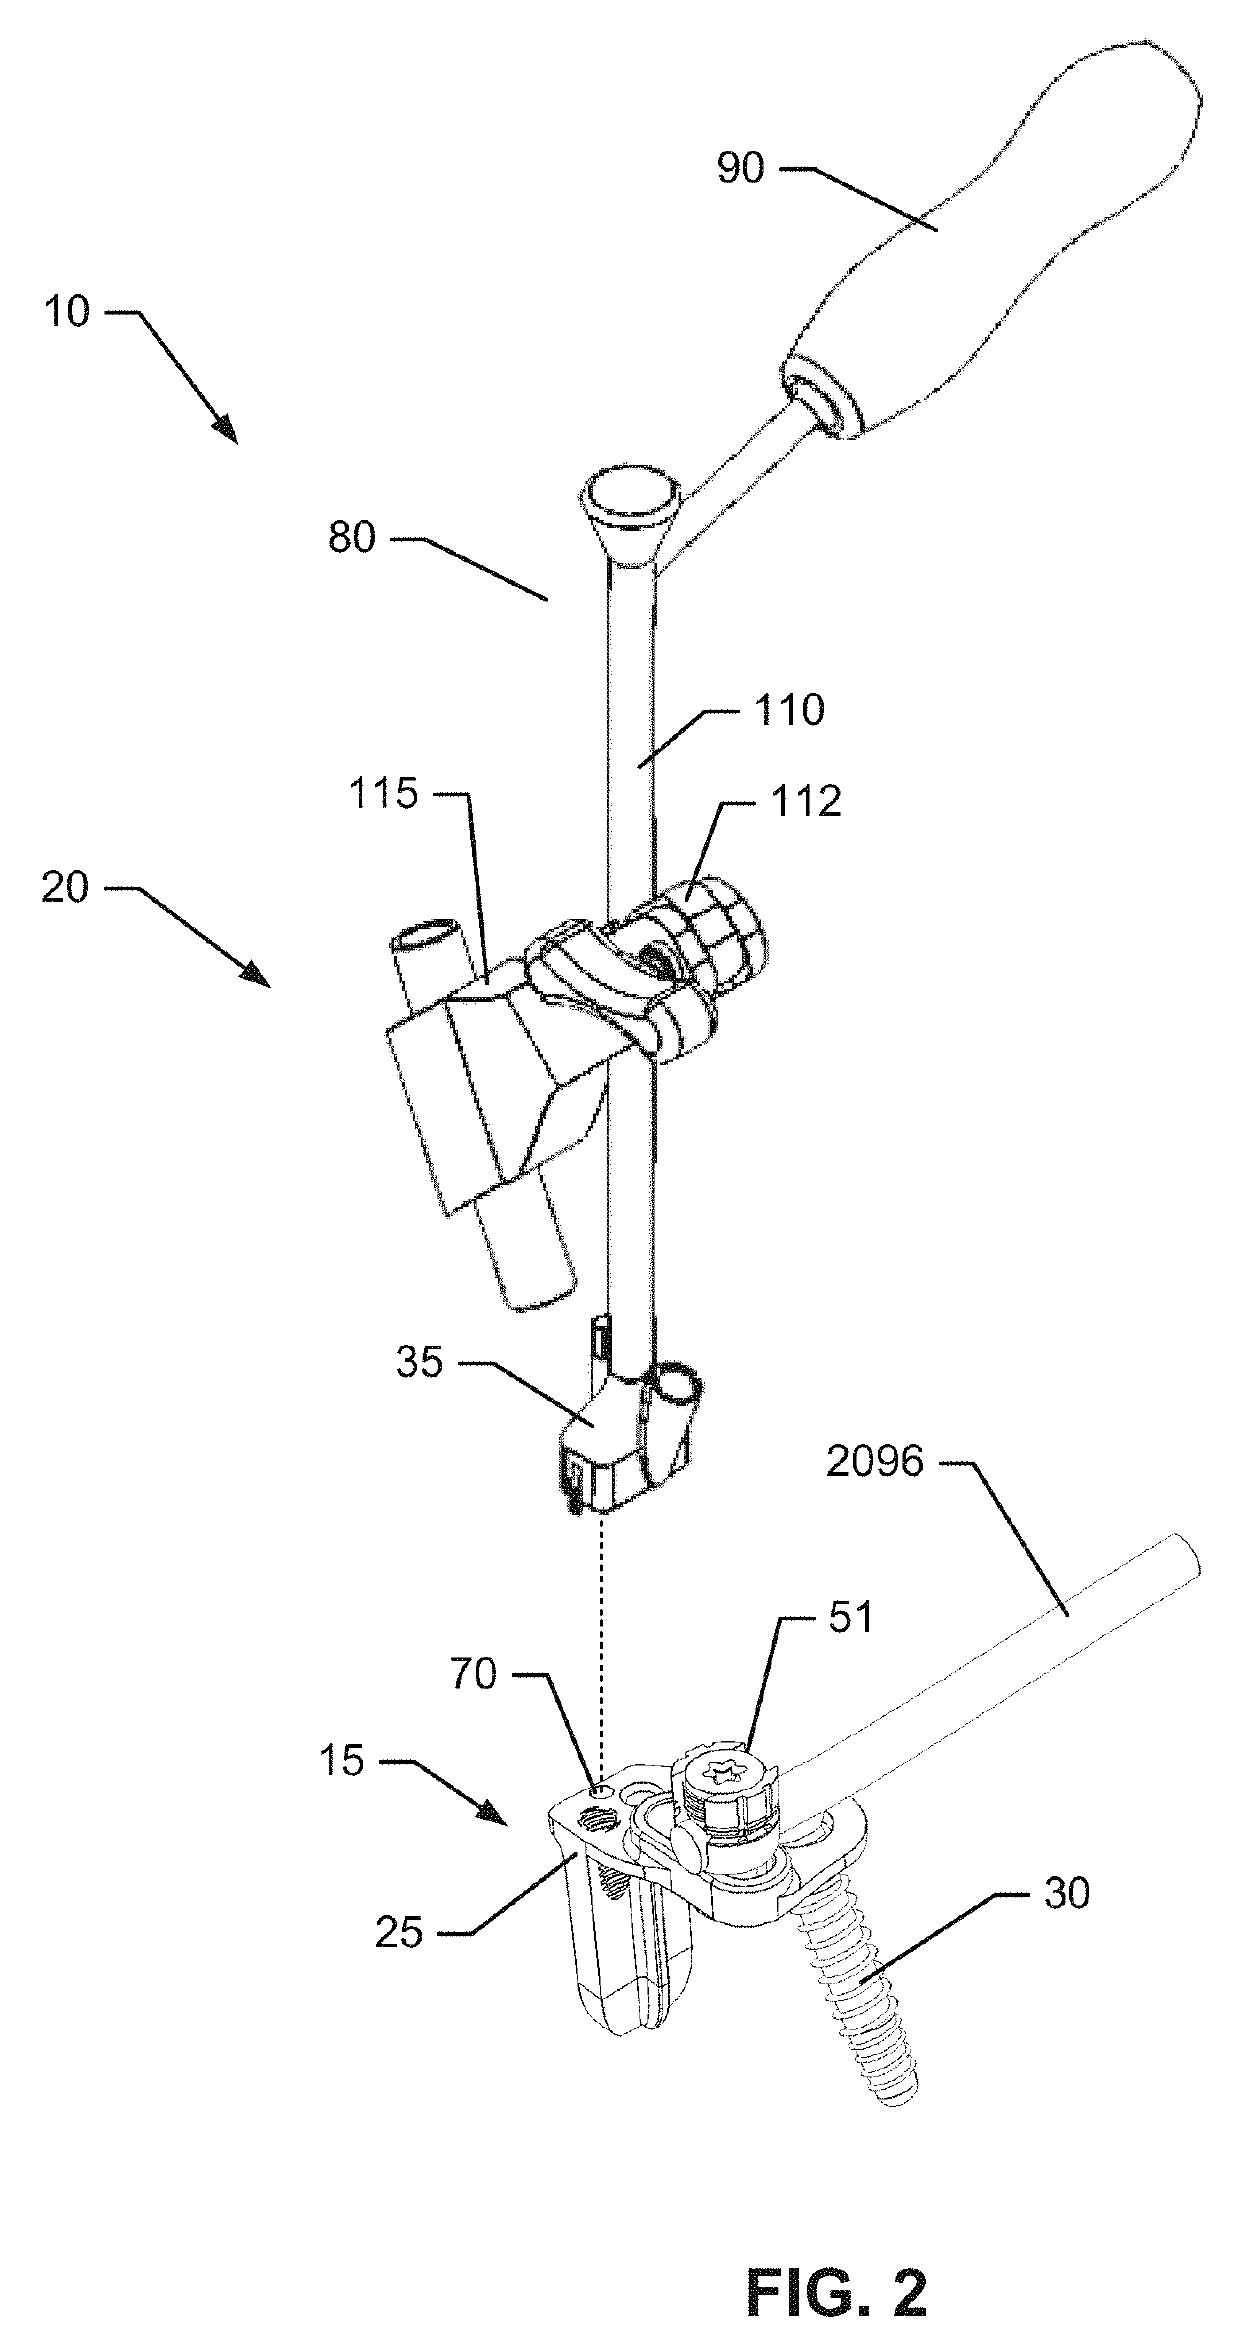 Systems and methods for fusing a sacroiliac joint and anchoring an orthopedic appliance